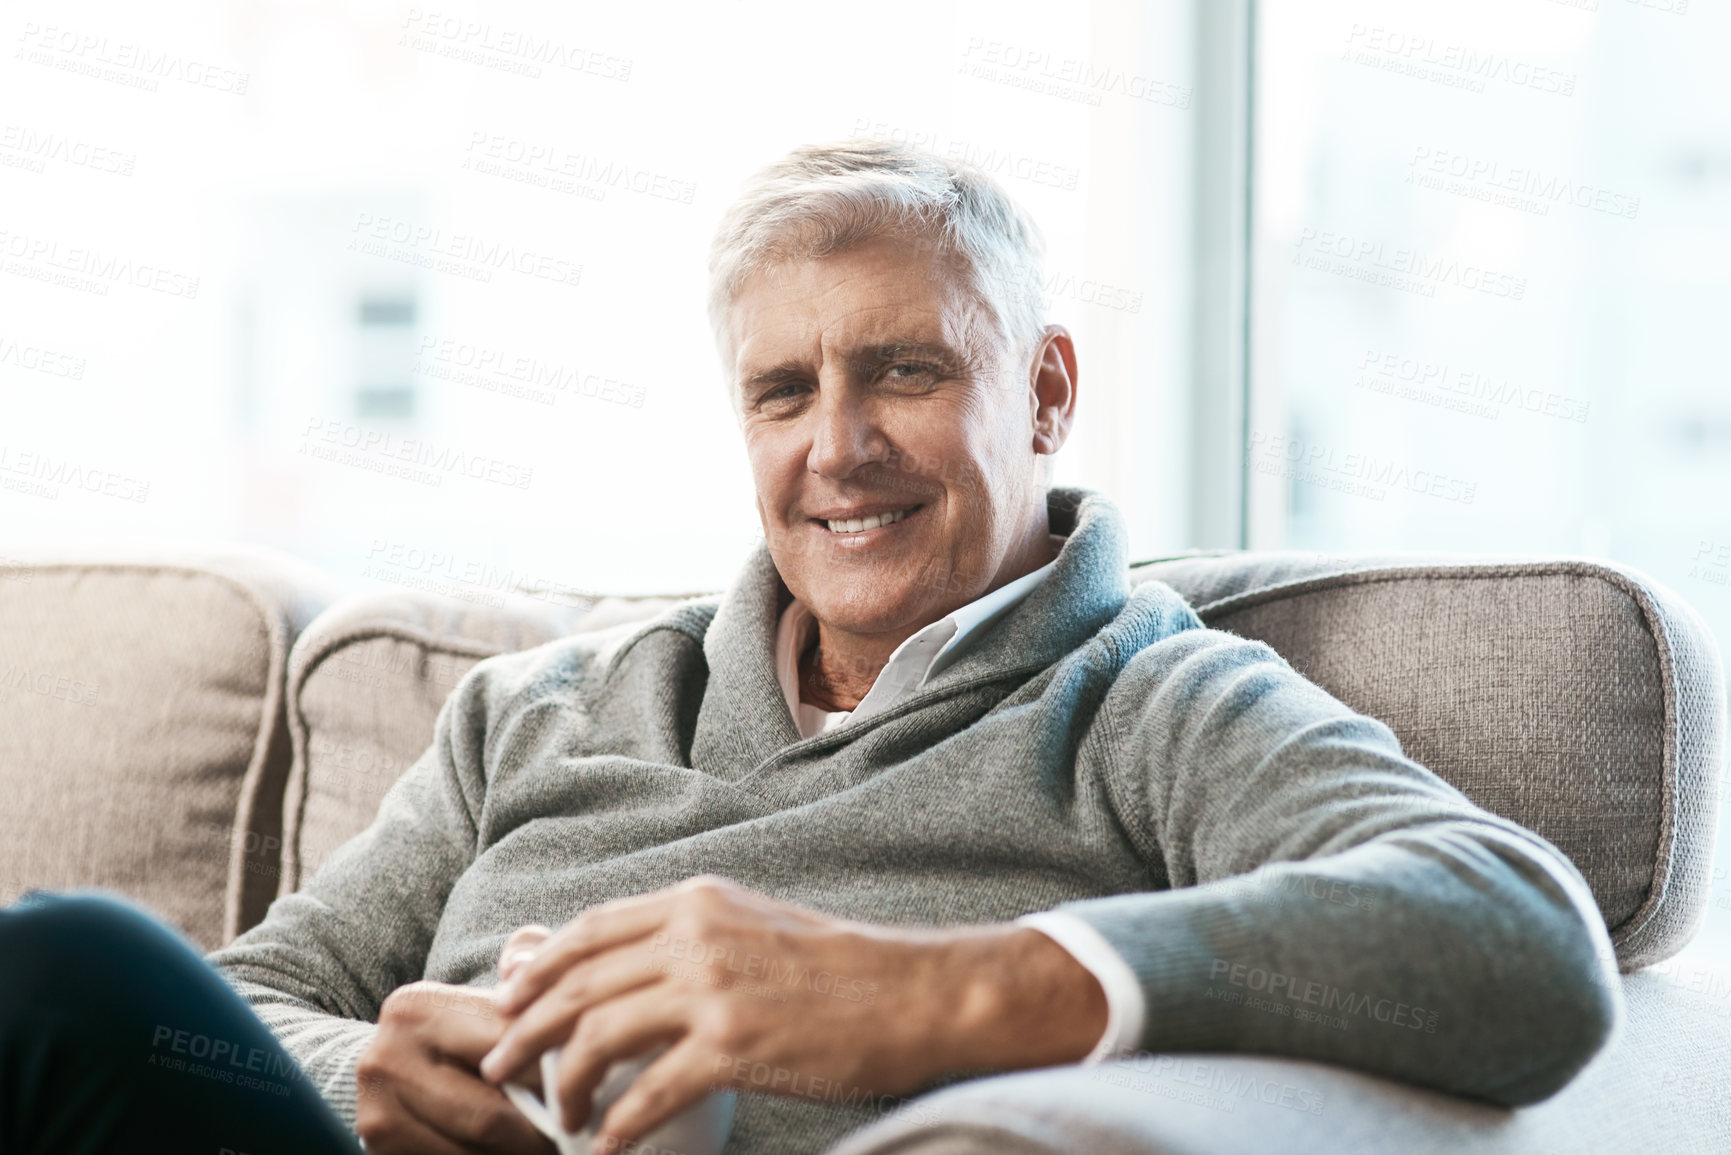 Buy stock photo Cropped portrait of a handsome mature man enjoying a coffee while relaxing on the sofa at home